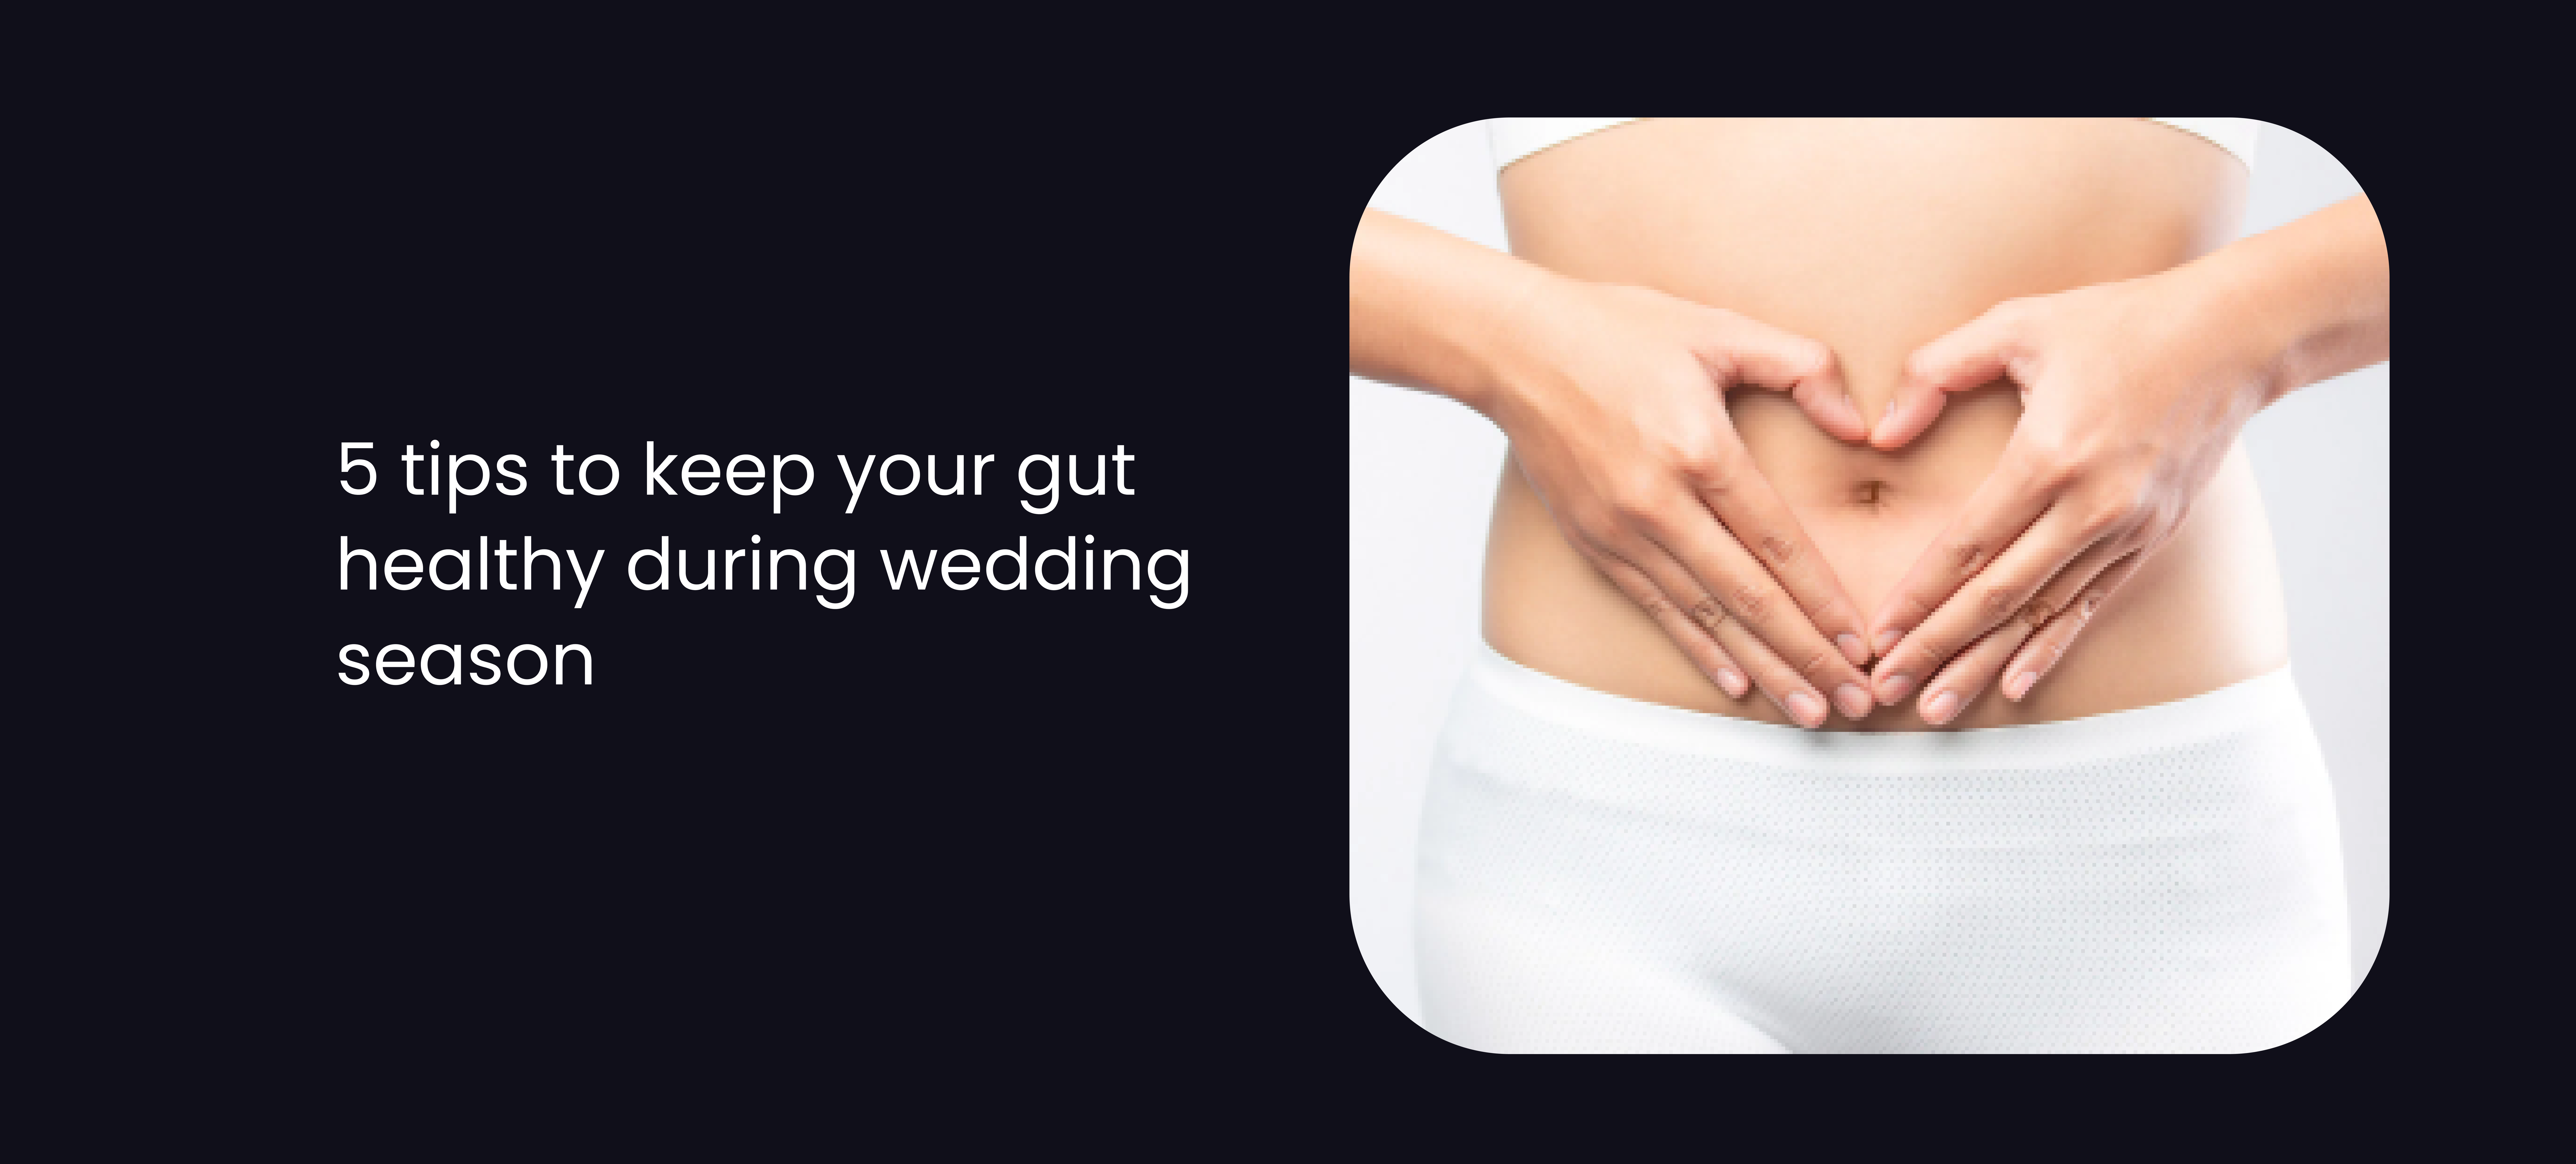 5 tips to keep your gut healthy during wedding season